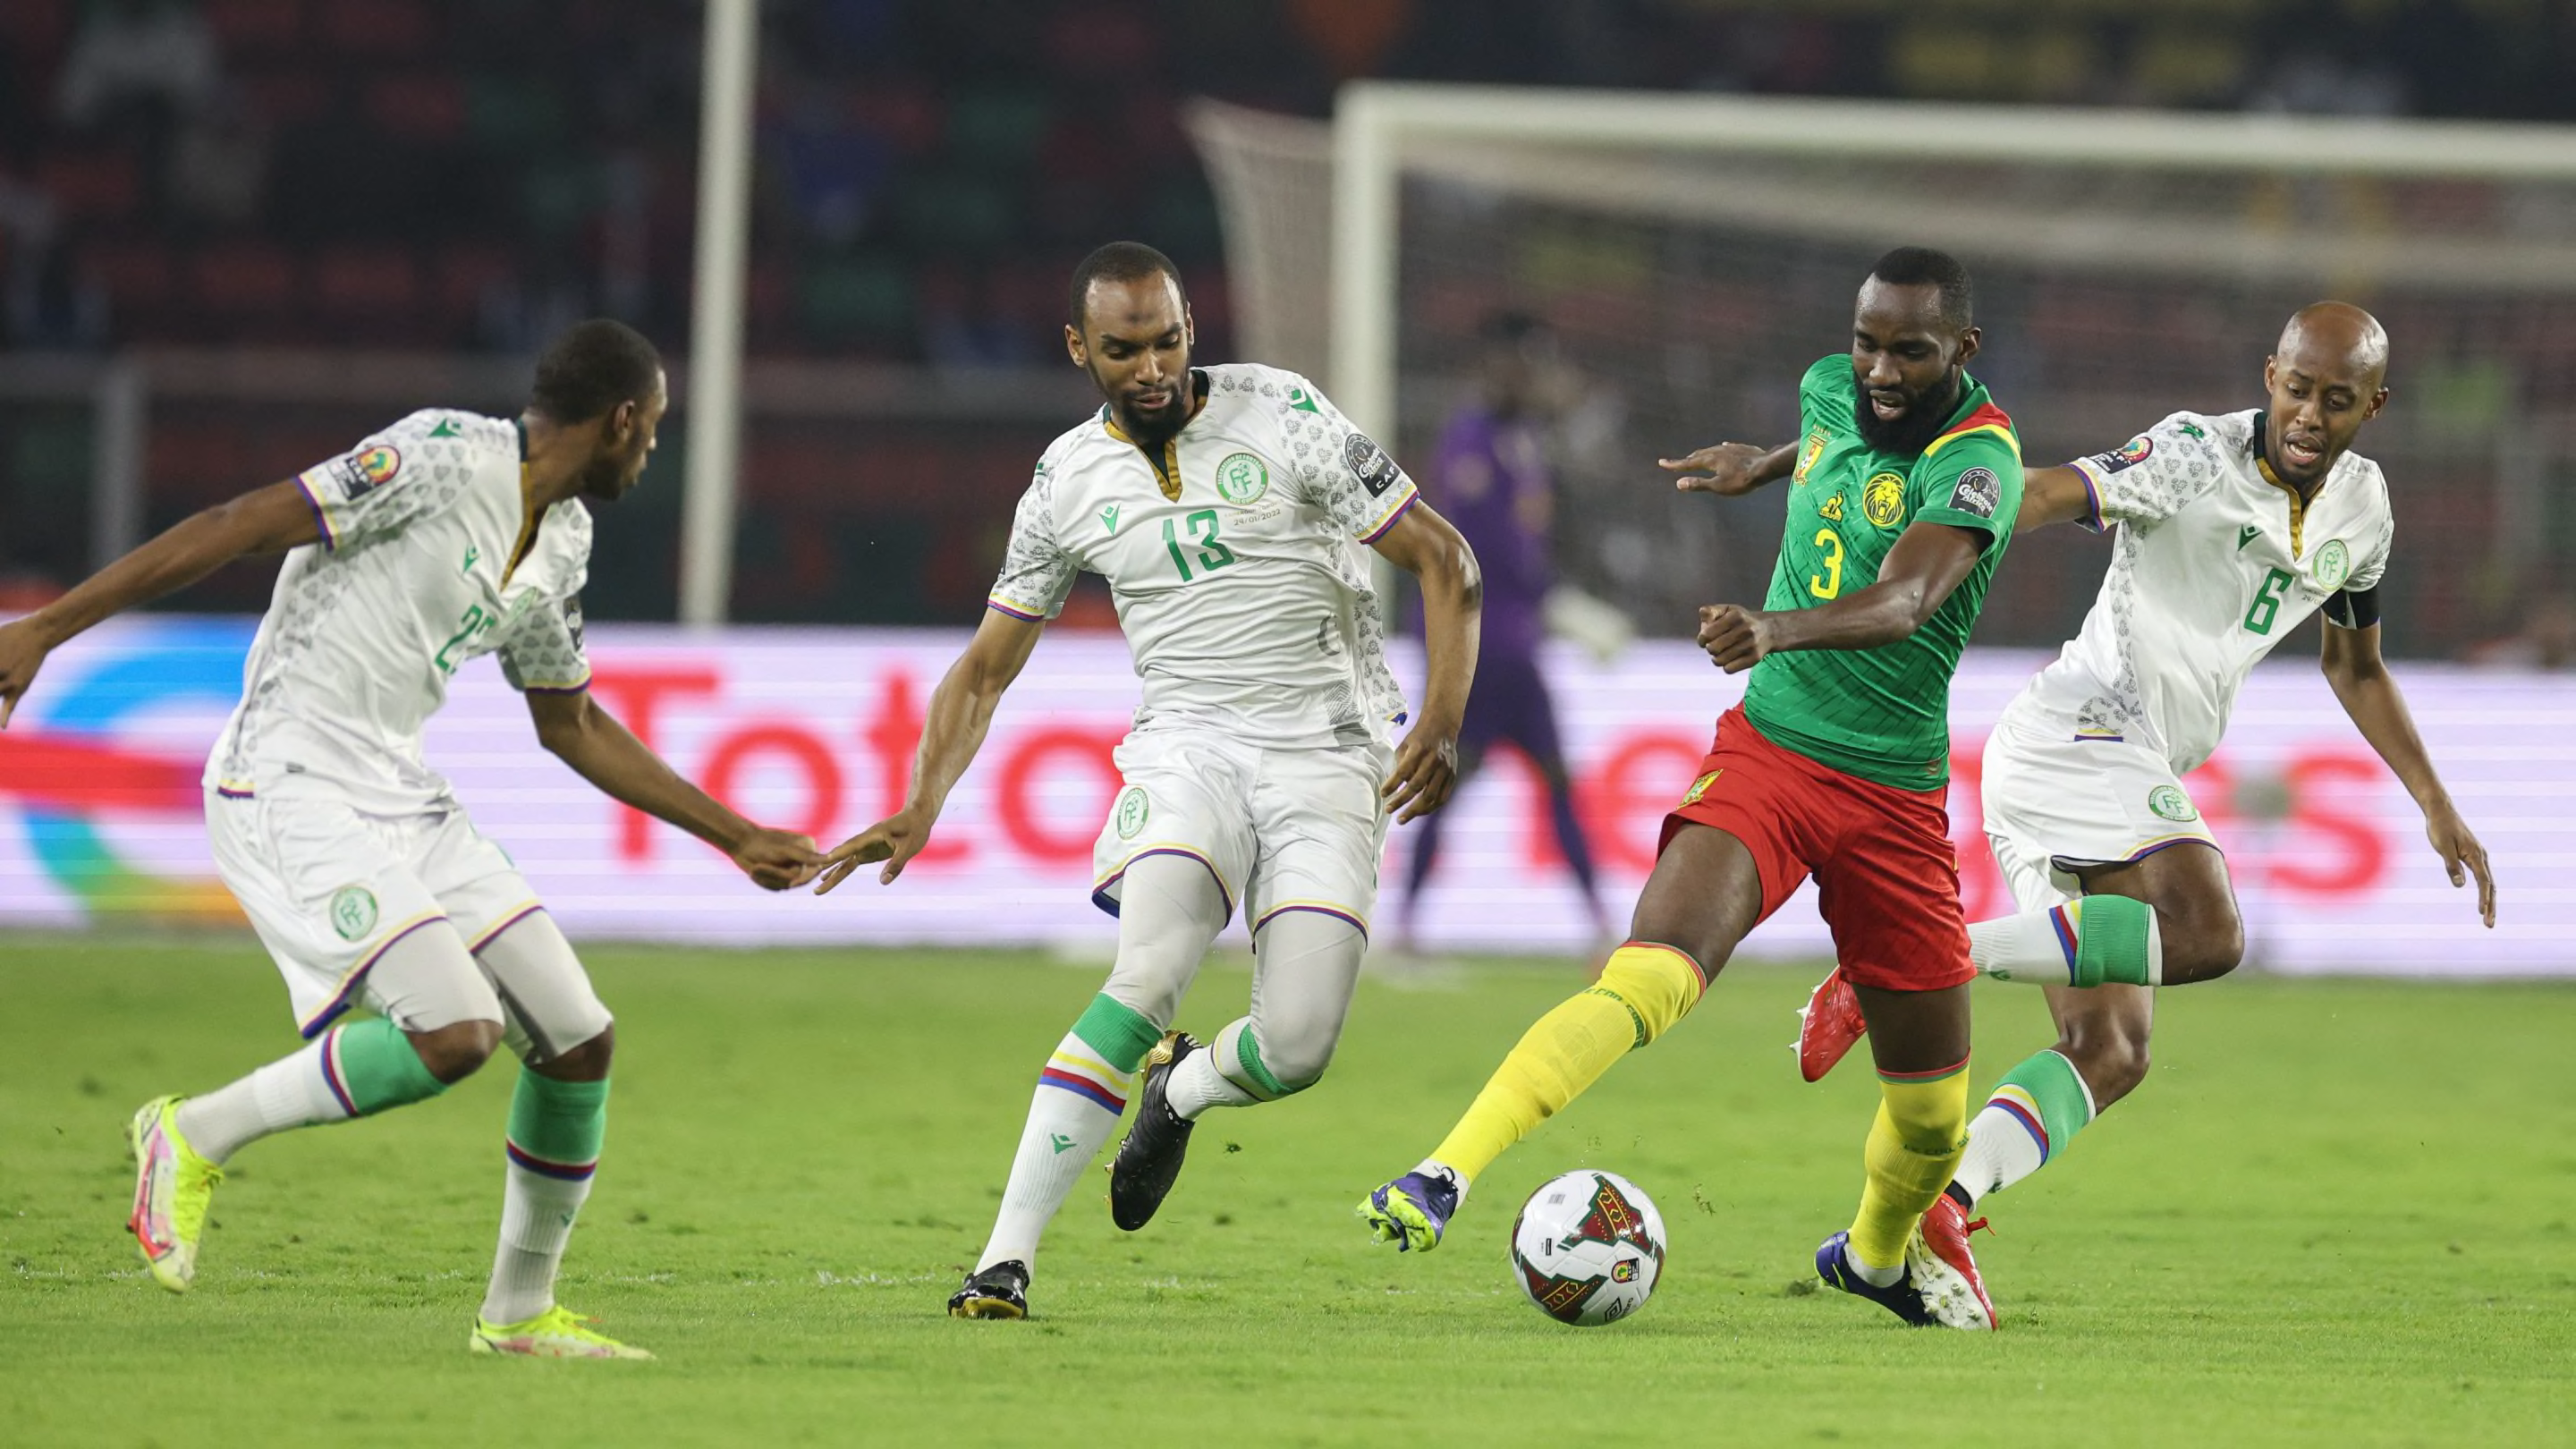 AFCON tragedy sees at least 8 people die in stampede outside stadium